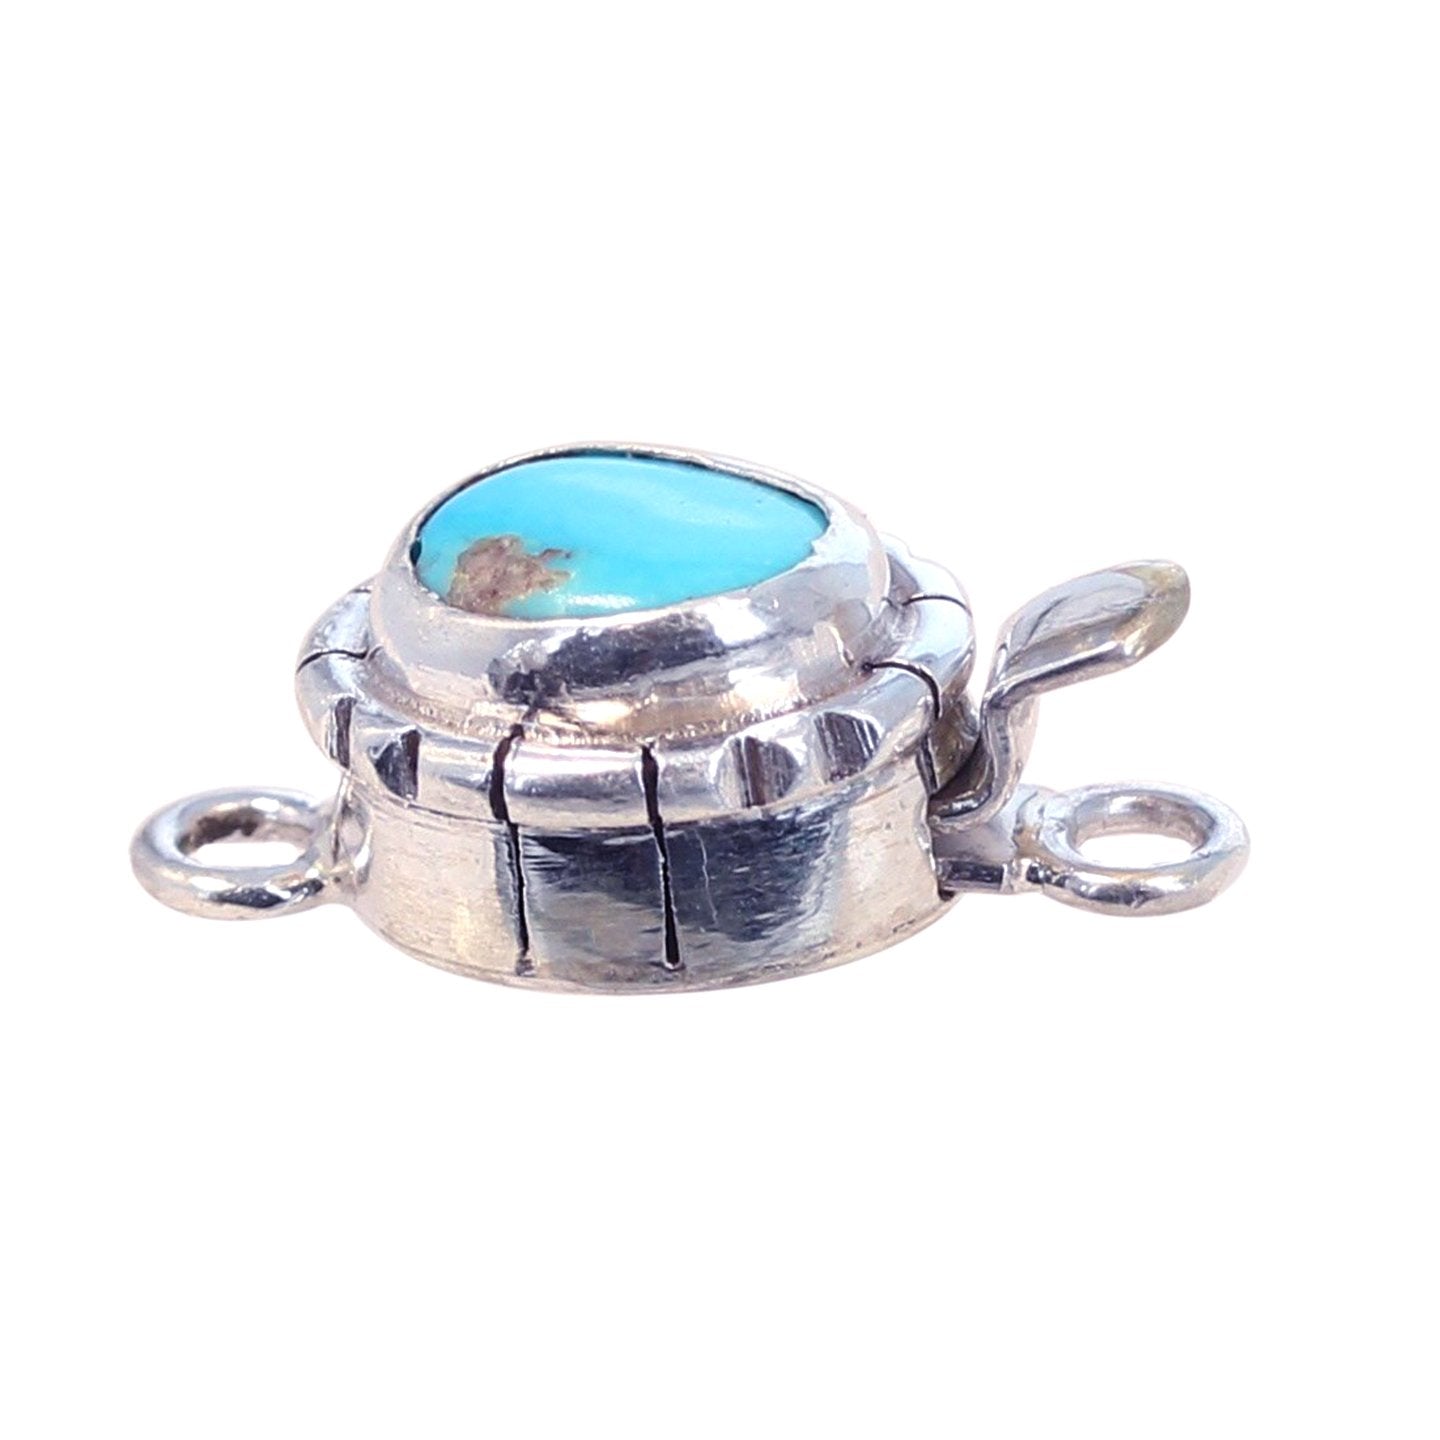 Castle Dome Turquoise Sterling Clasp Southwest Style -NewWorldGems